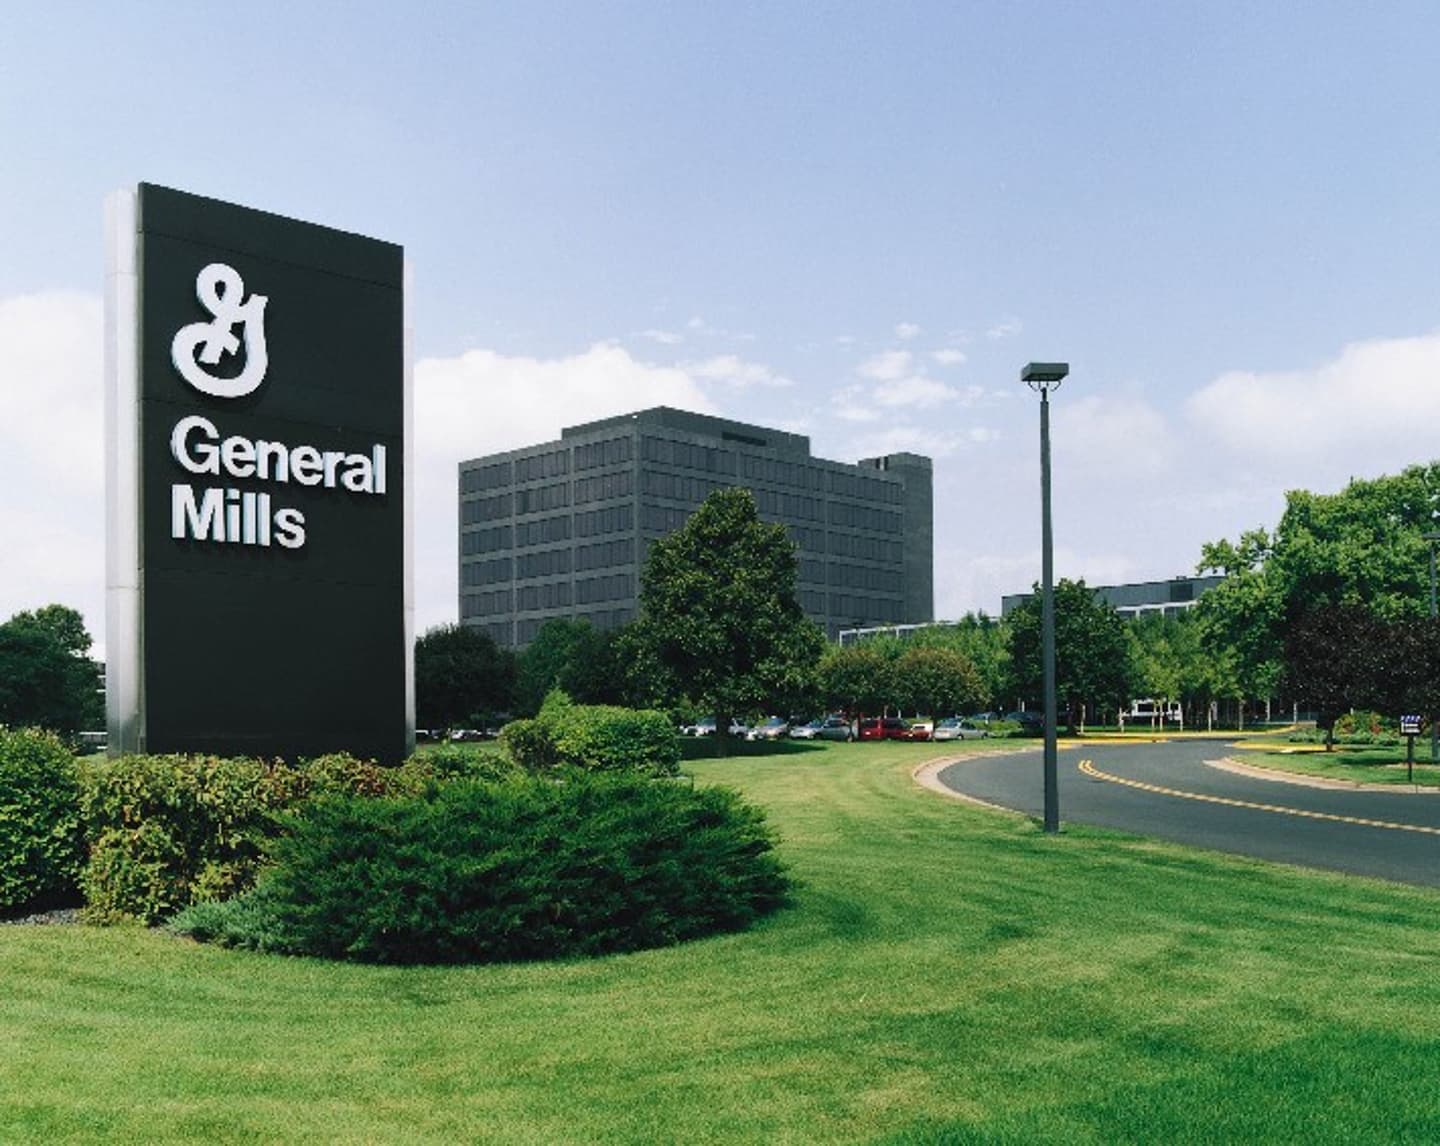 General mills in the Argentina